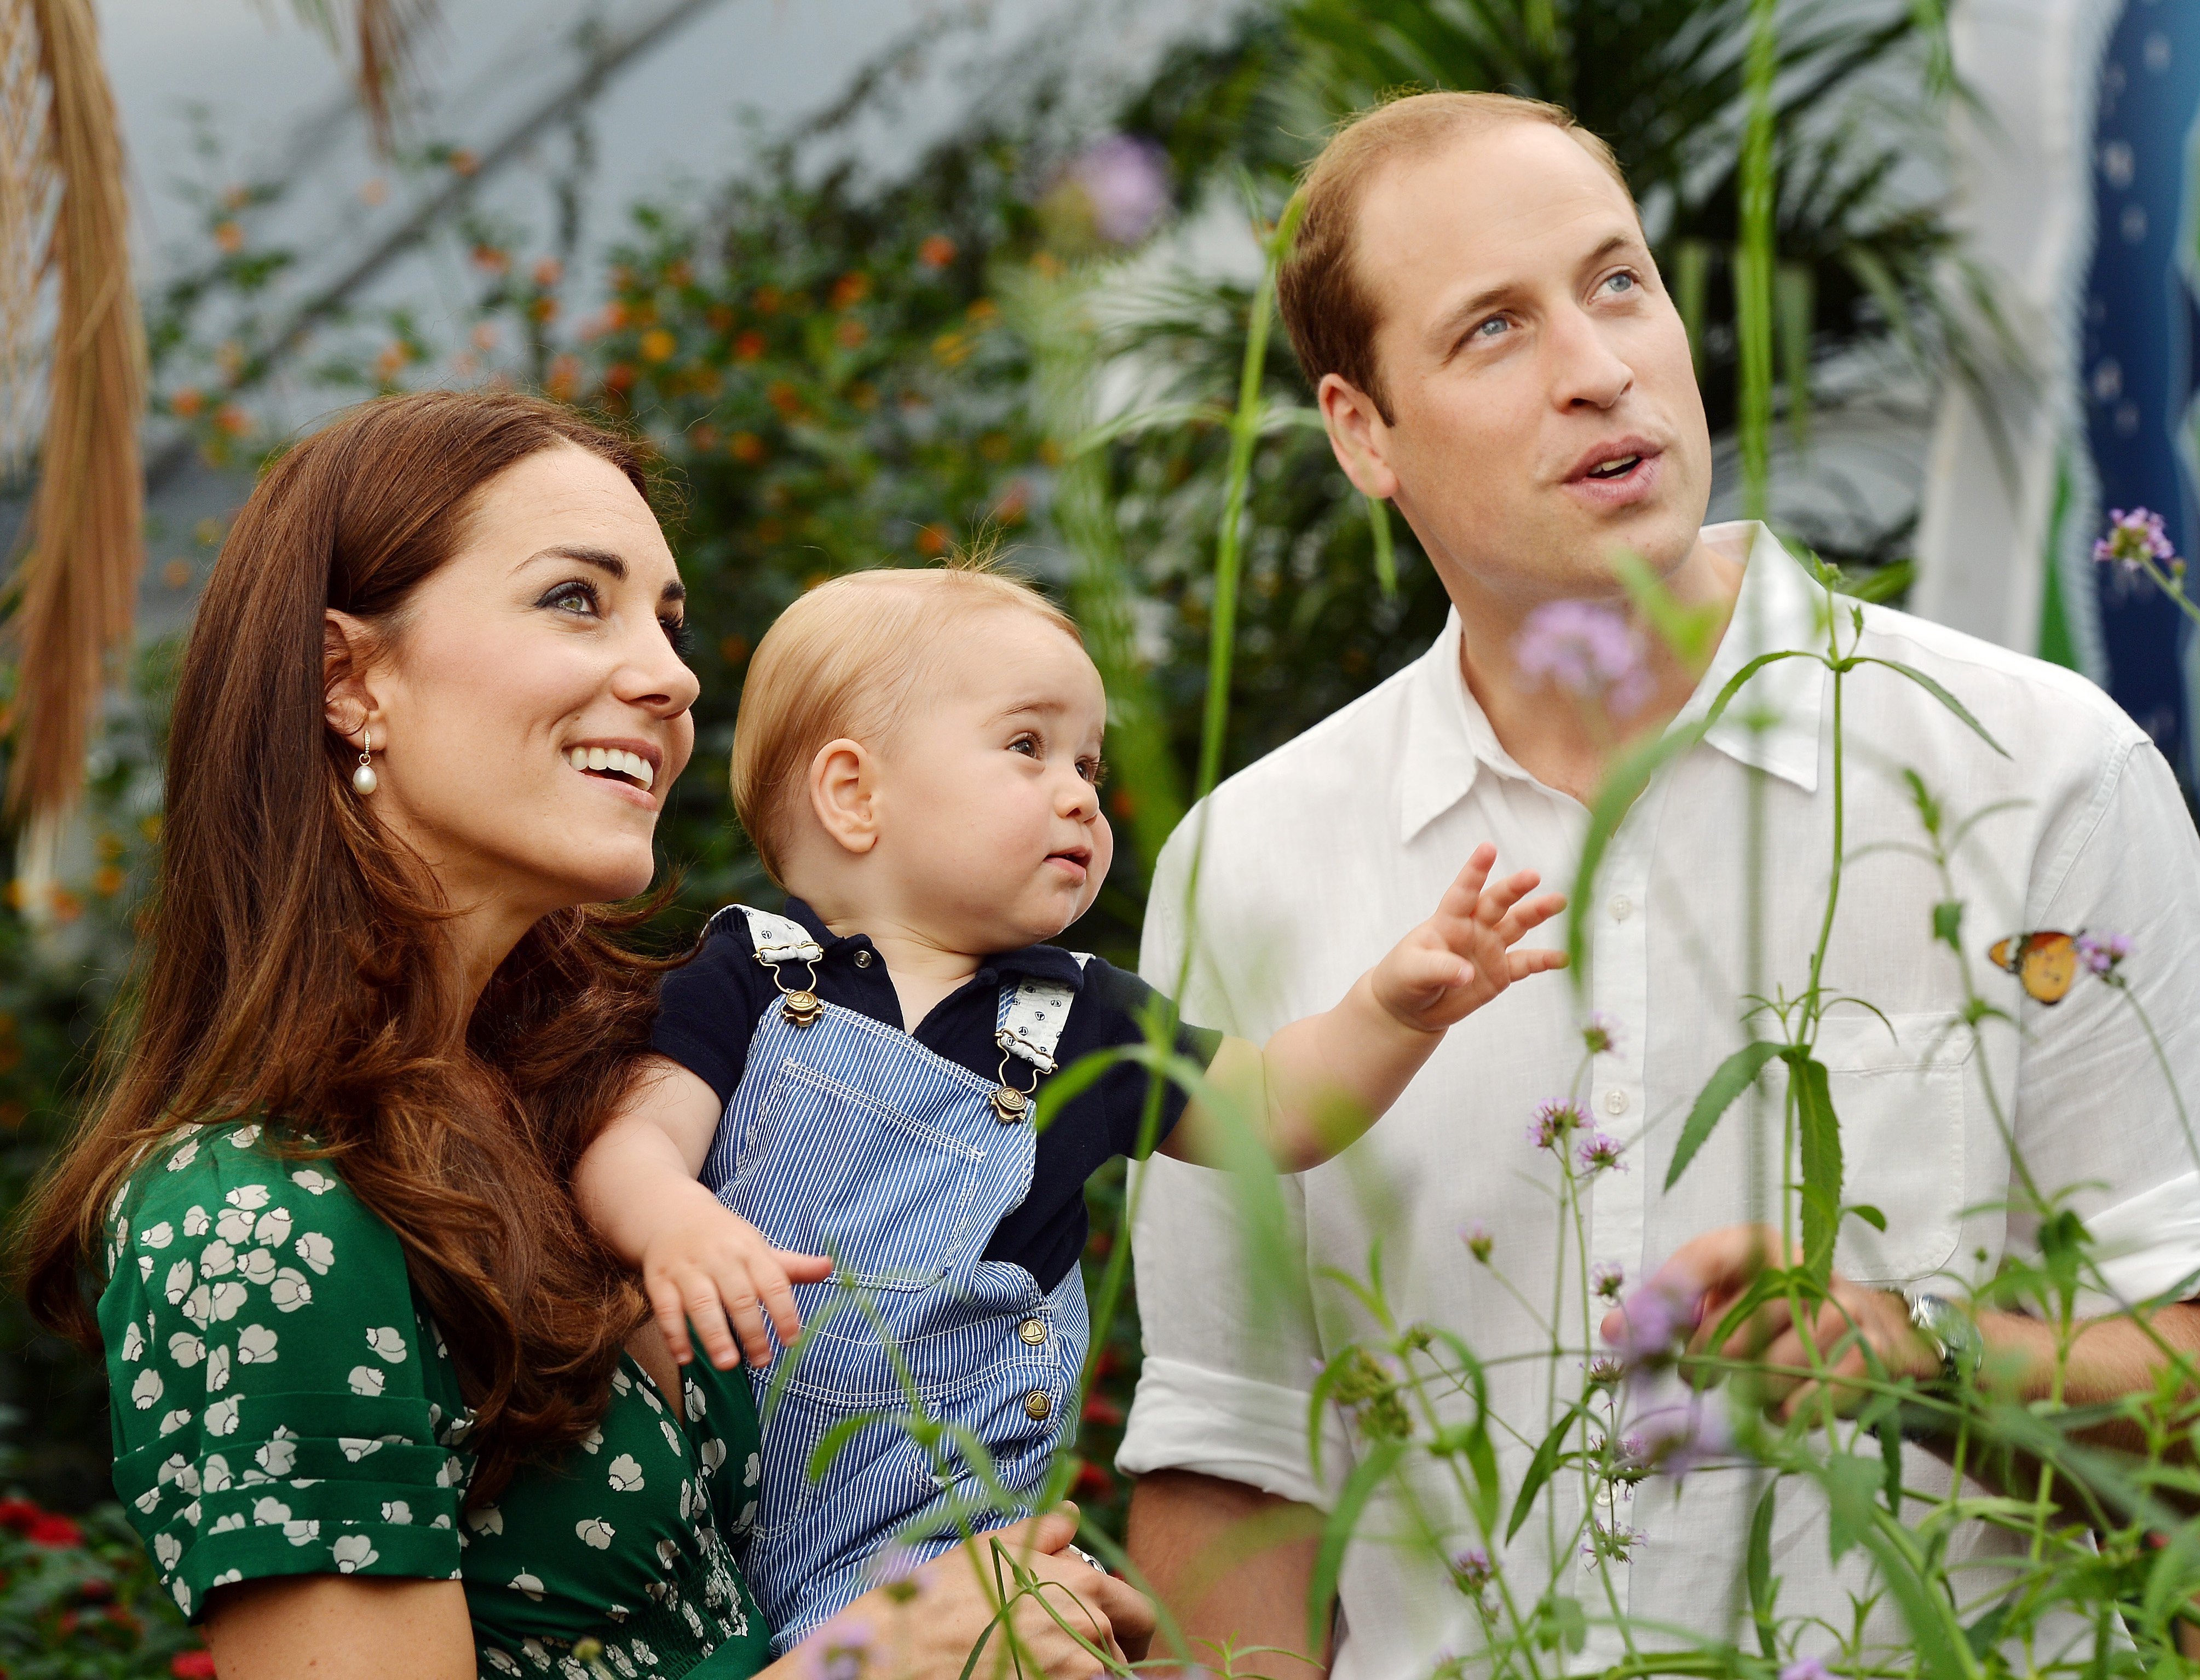 Duchess Kate, Prince George, and Prince William posing for George's first birthday photos | Photo: Getty Images/John Stillwell or Press Association